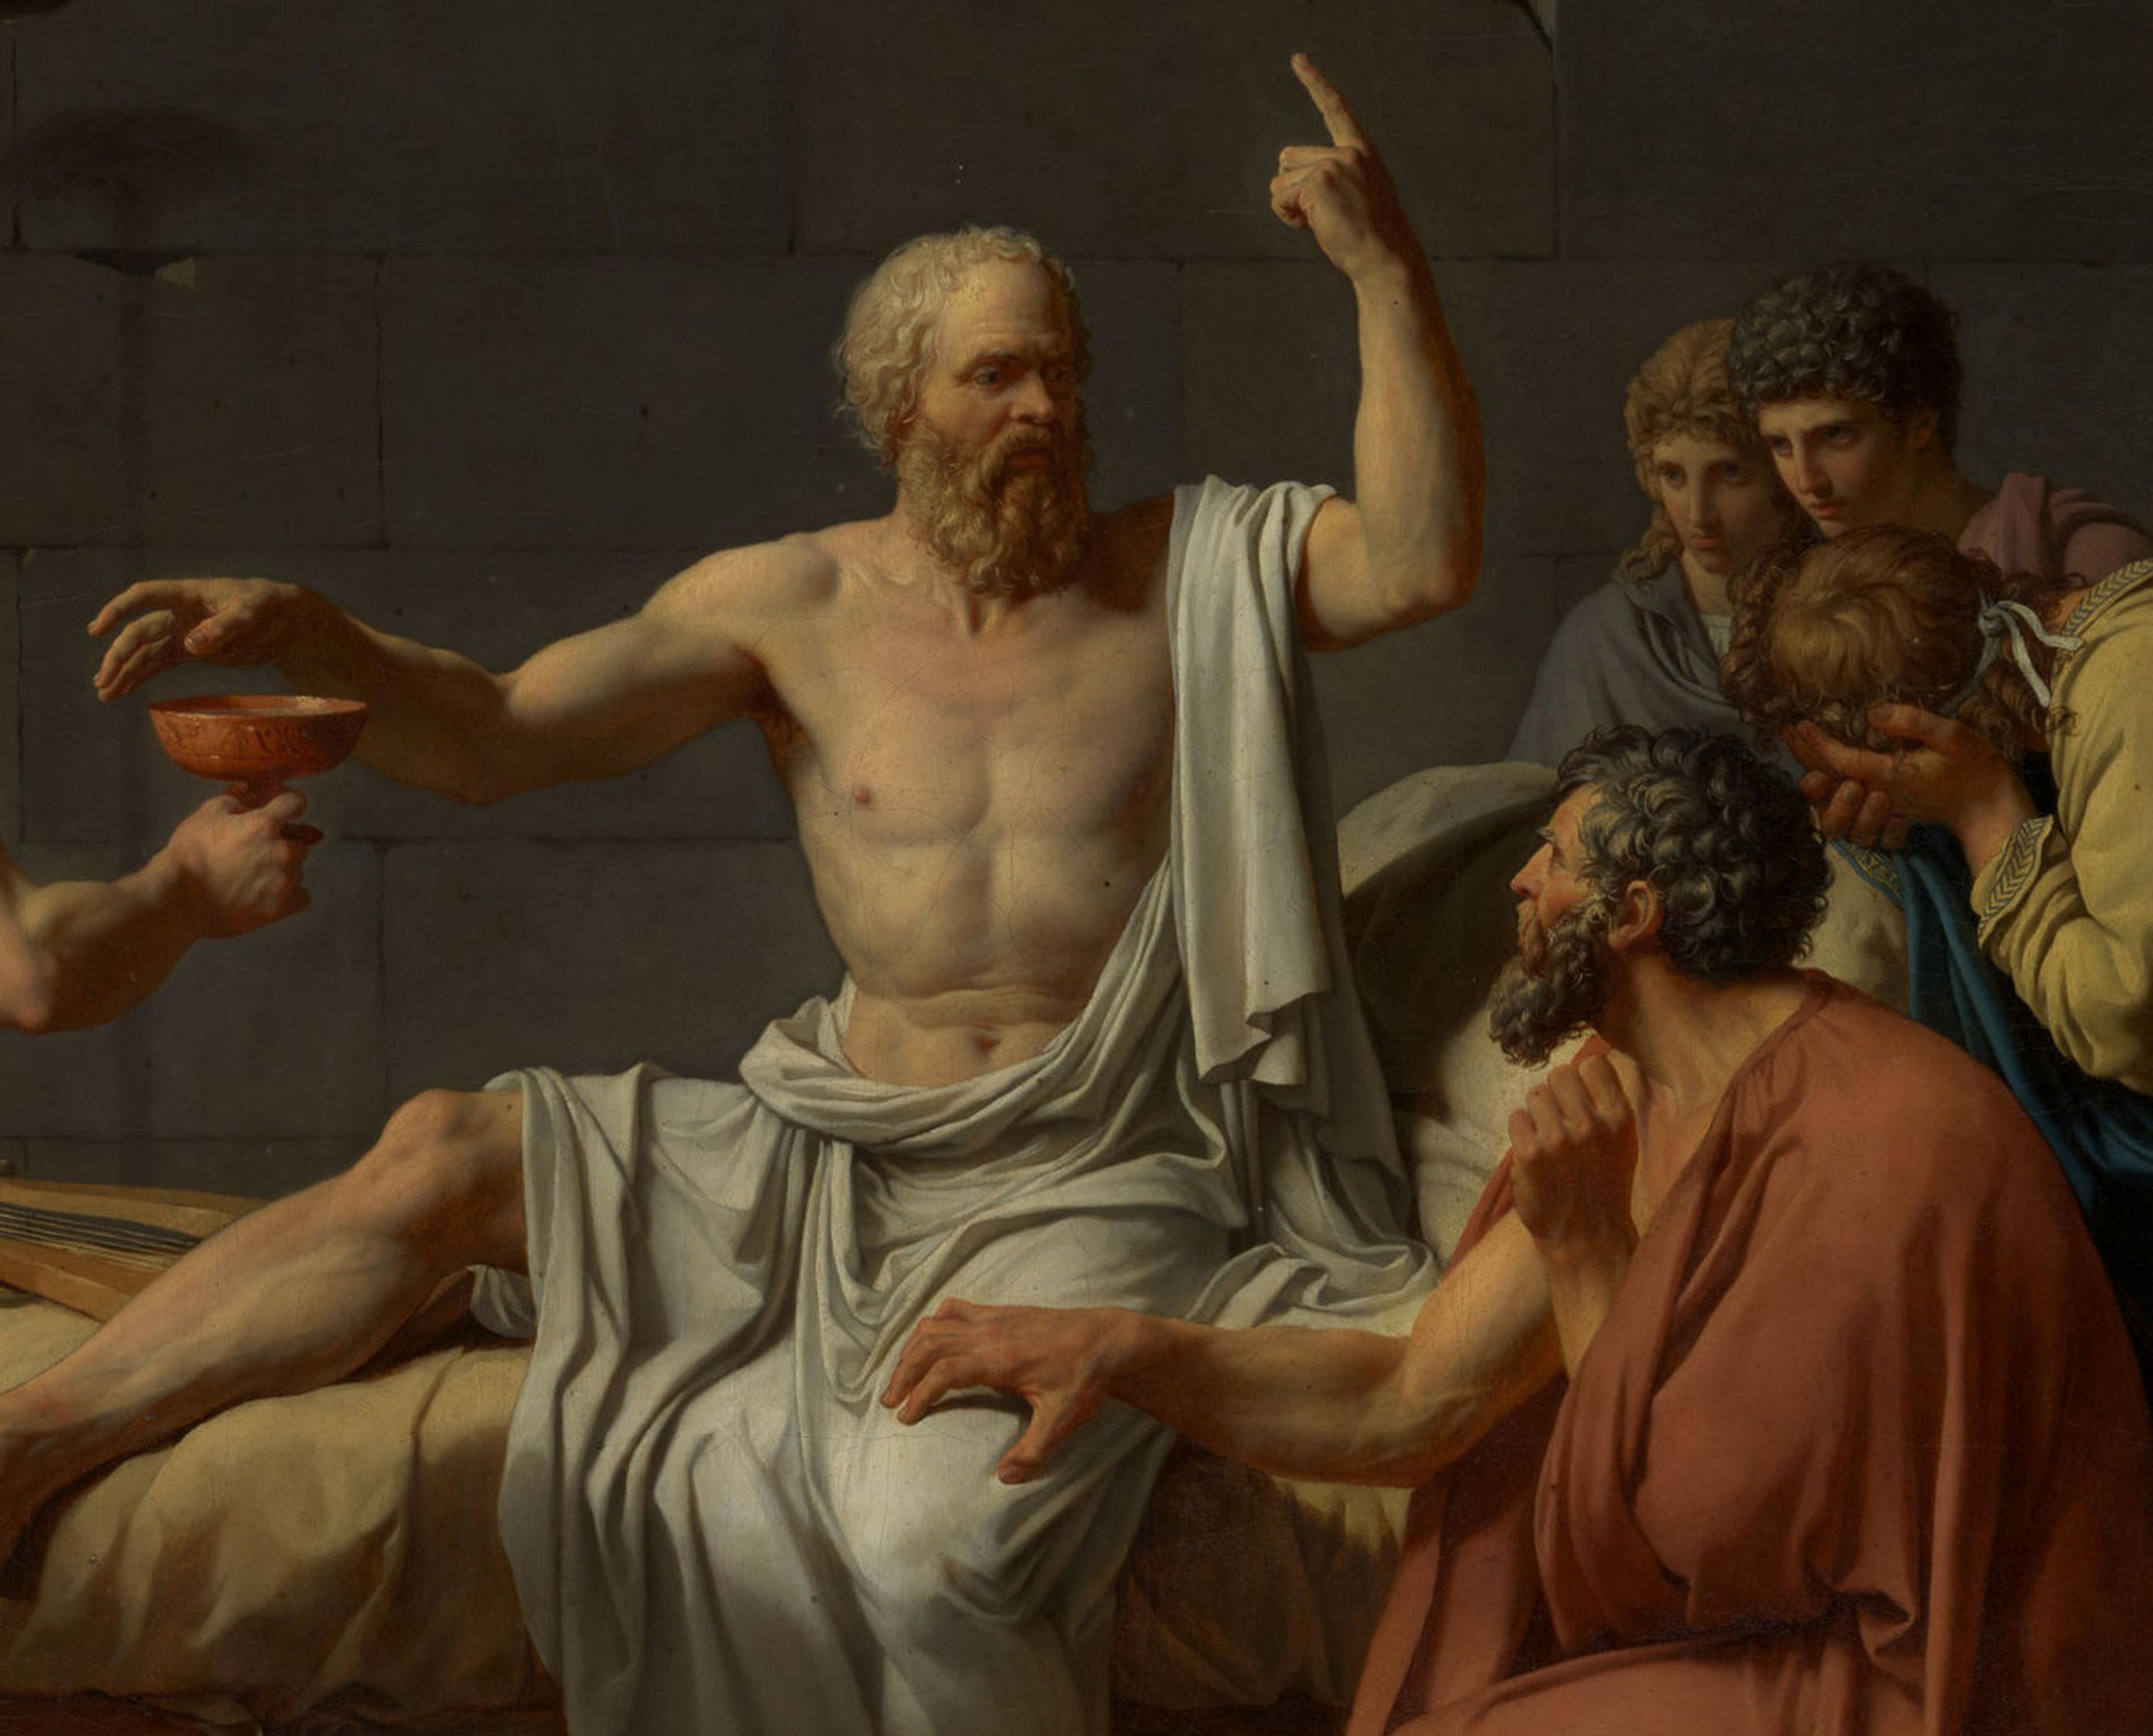 Detail of the central figure in Jacques Louis David's "Death of Socrates"